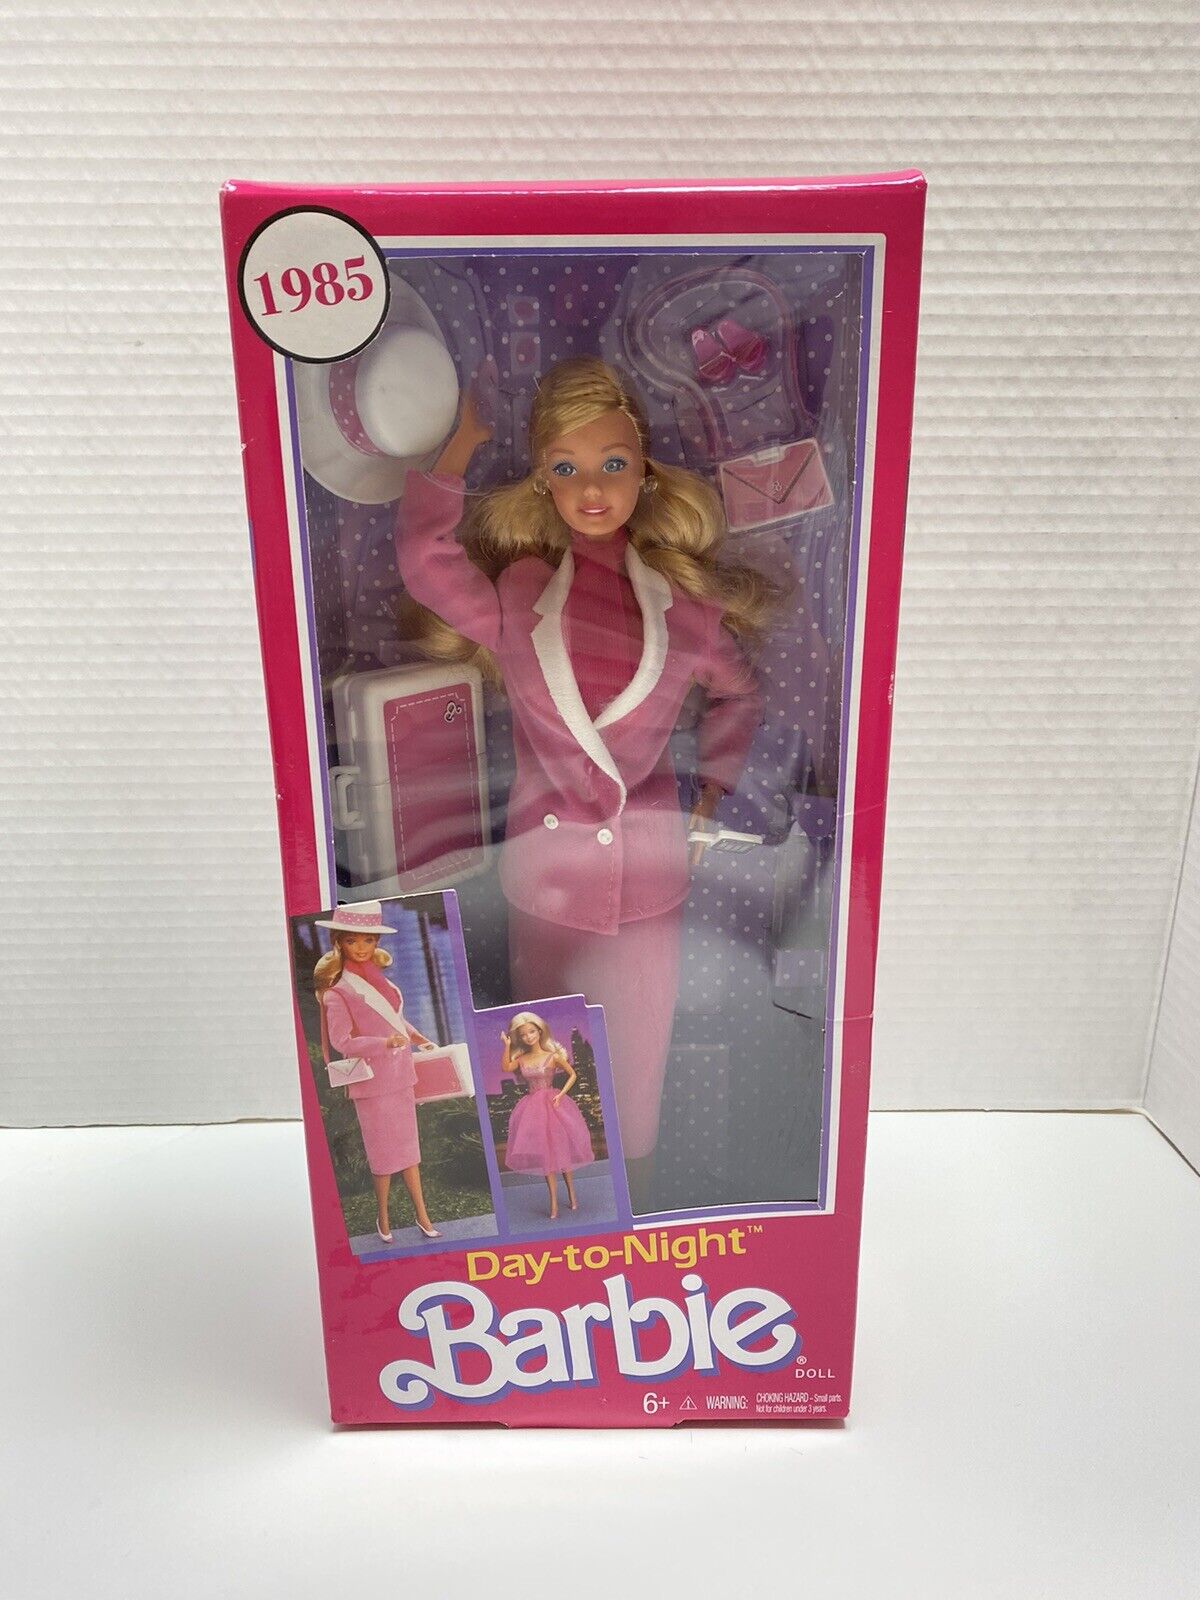 Barbie Day to Night 1985 Reproduction FJH173 NRFB